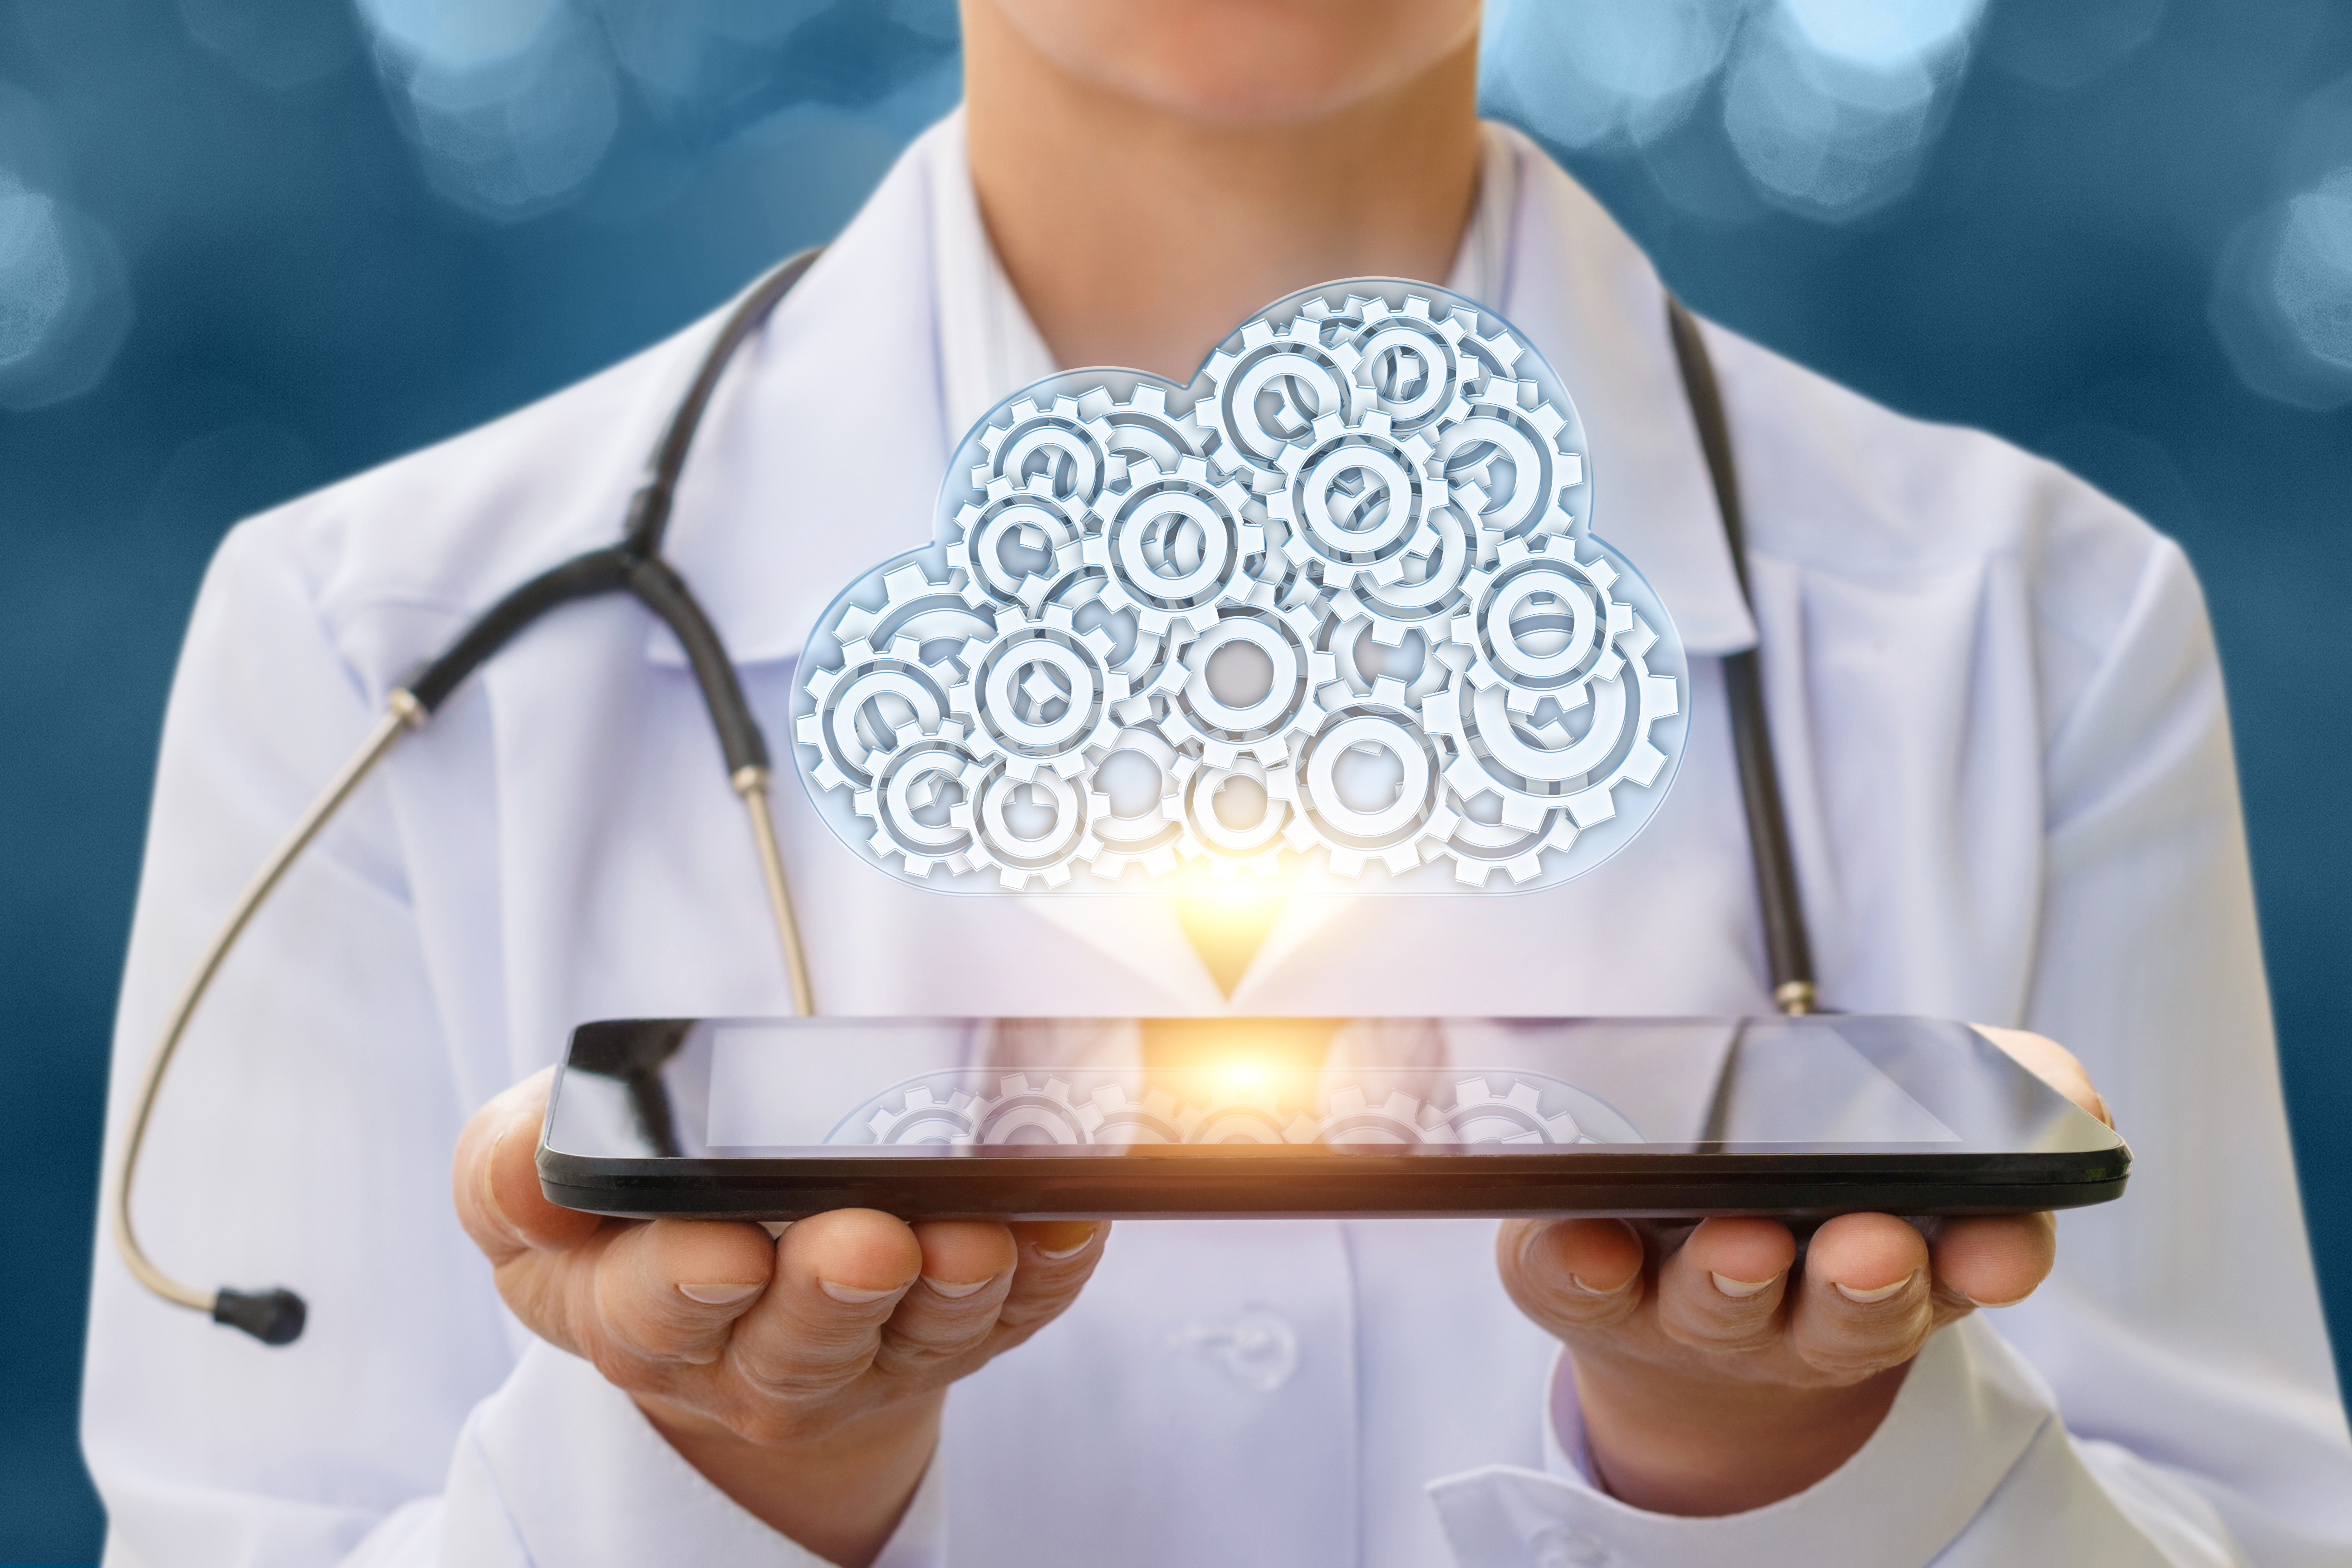 A person in a white lab coat, wearing a stethoscope, holds an electronic tablet. Above the tablet is the image of a cloud, indicating a place where data are sent for storage.